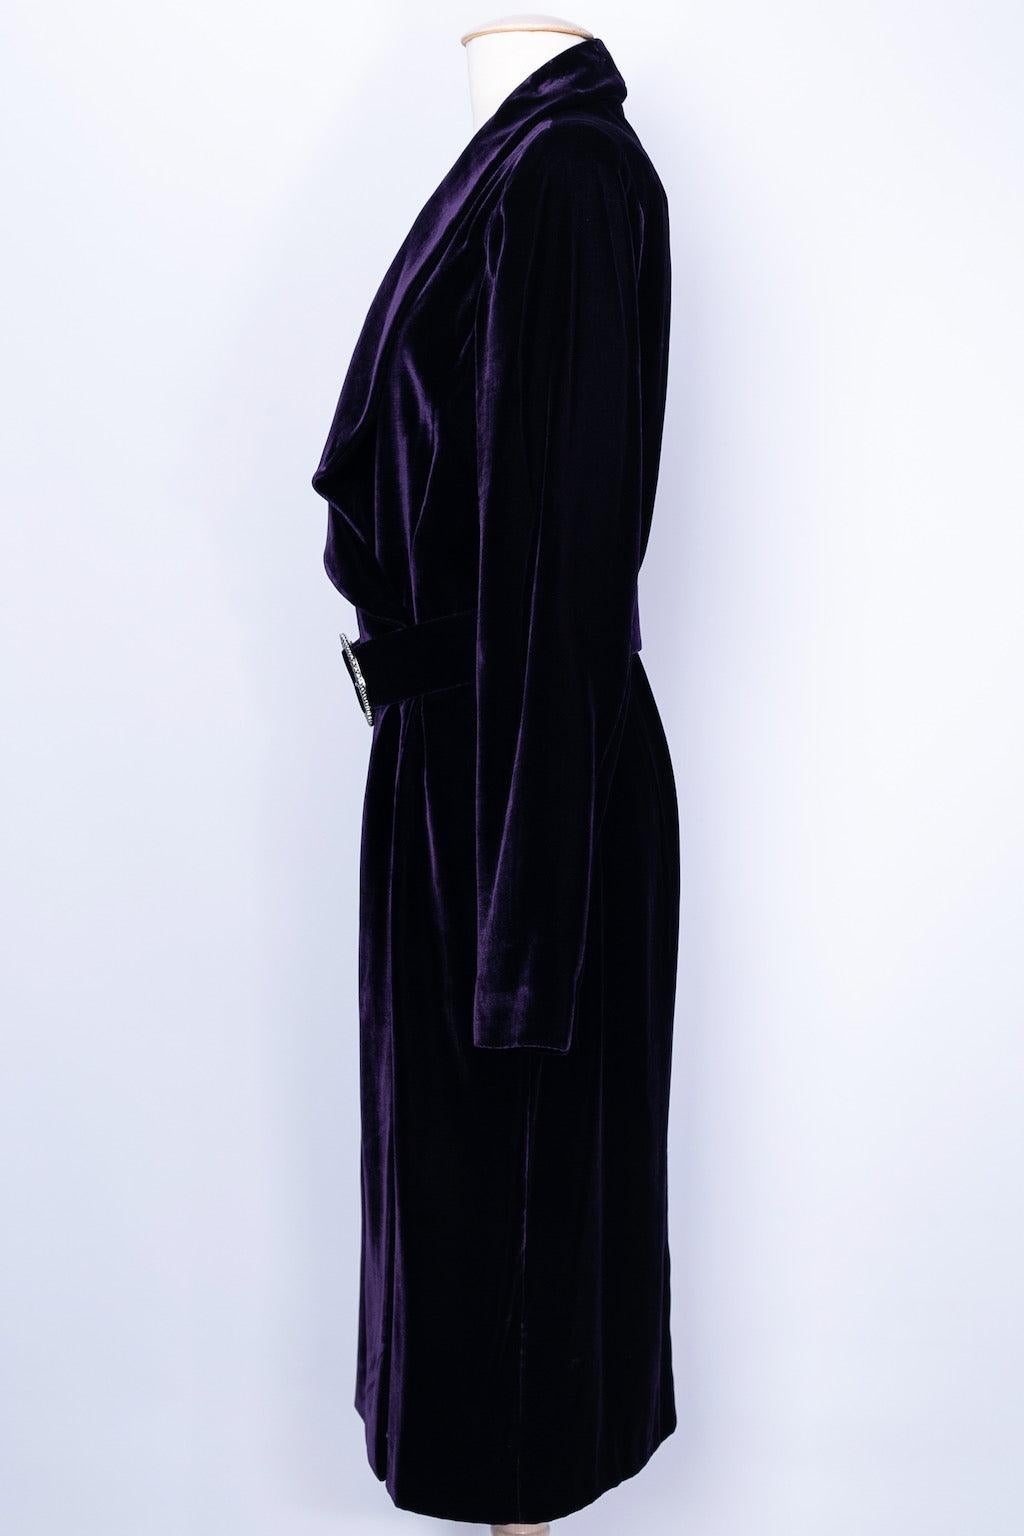 Loris Azzaro - Evening dress in peuple velvet with an asymmetrical snap fastening. 2005 Collection, under the artistic direction of Dominique Sirop. Indicated size 44FR, but it fits a size 40FR.

Additional information: 
Dimensions: Shoulders: 42 cm